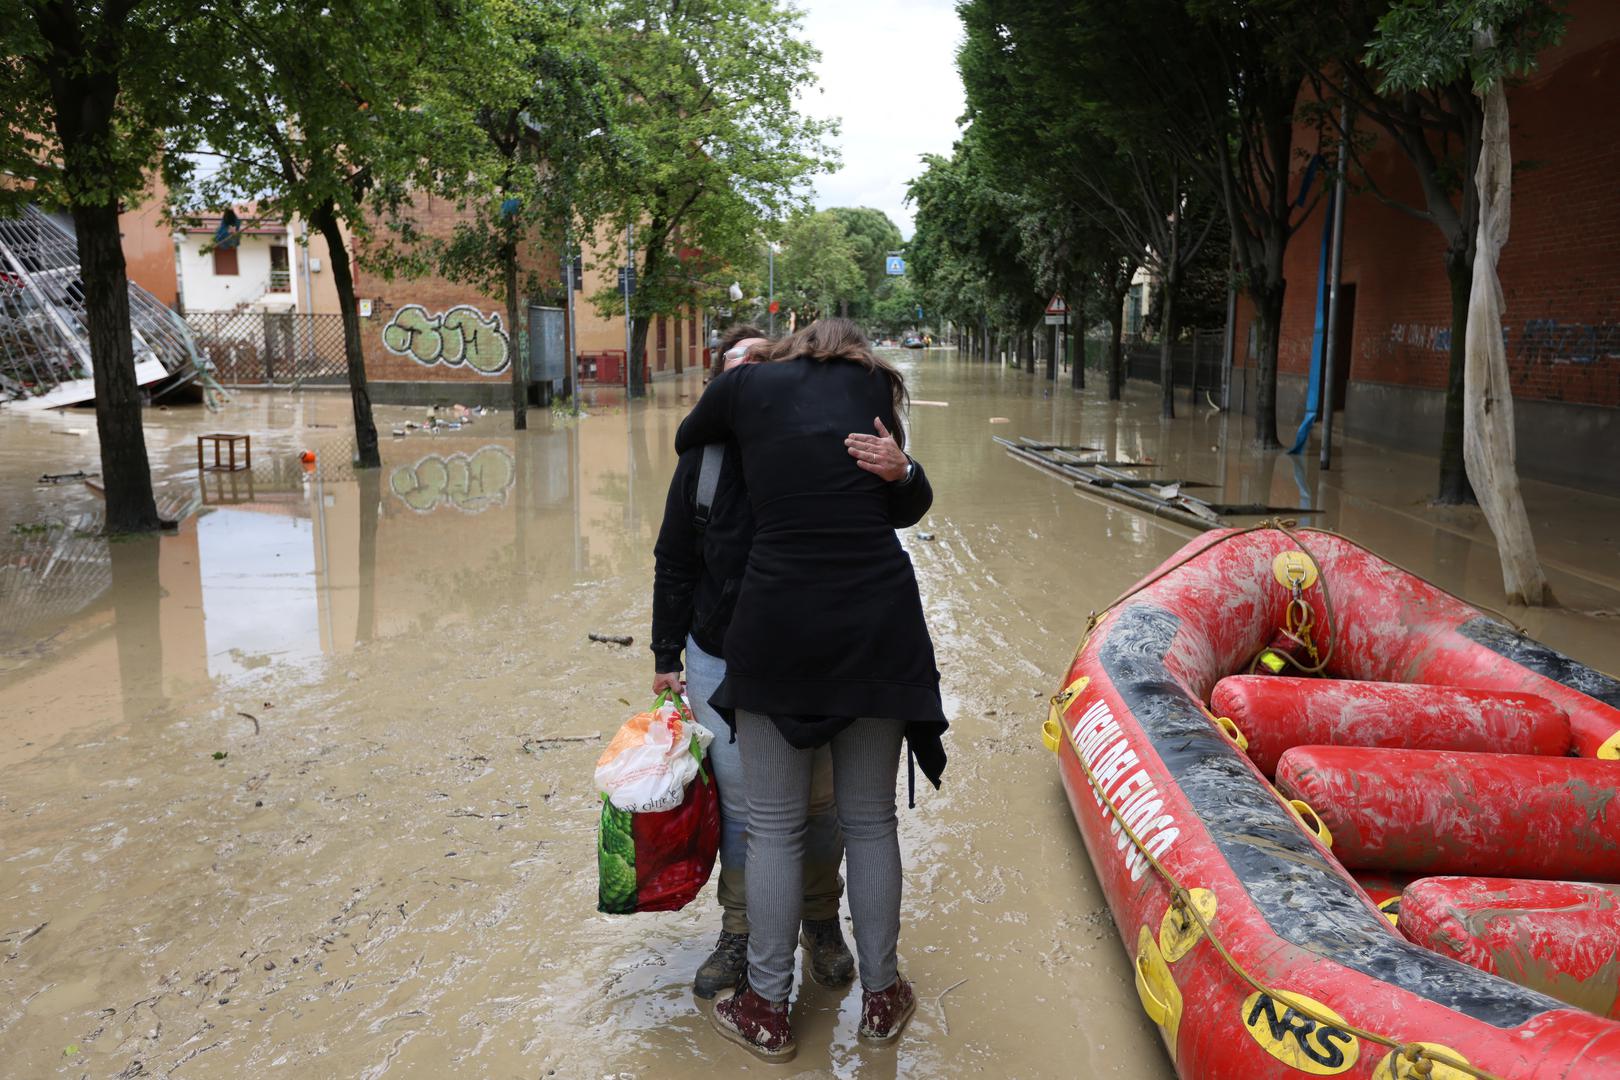 People embrace on a flooded street, after heavy rains hit Italy's Emilia Romagna region, in Faenza, Italy, May 18, 2023. REUTERS/Claudia Greco Photo: CLAUDIA GRECO/REUTERS